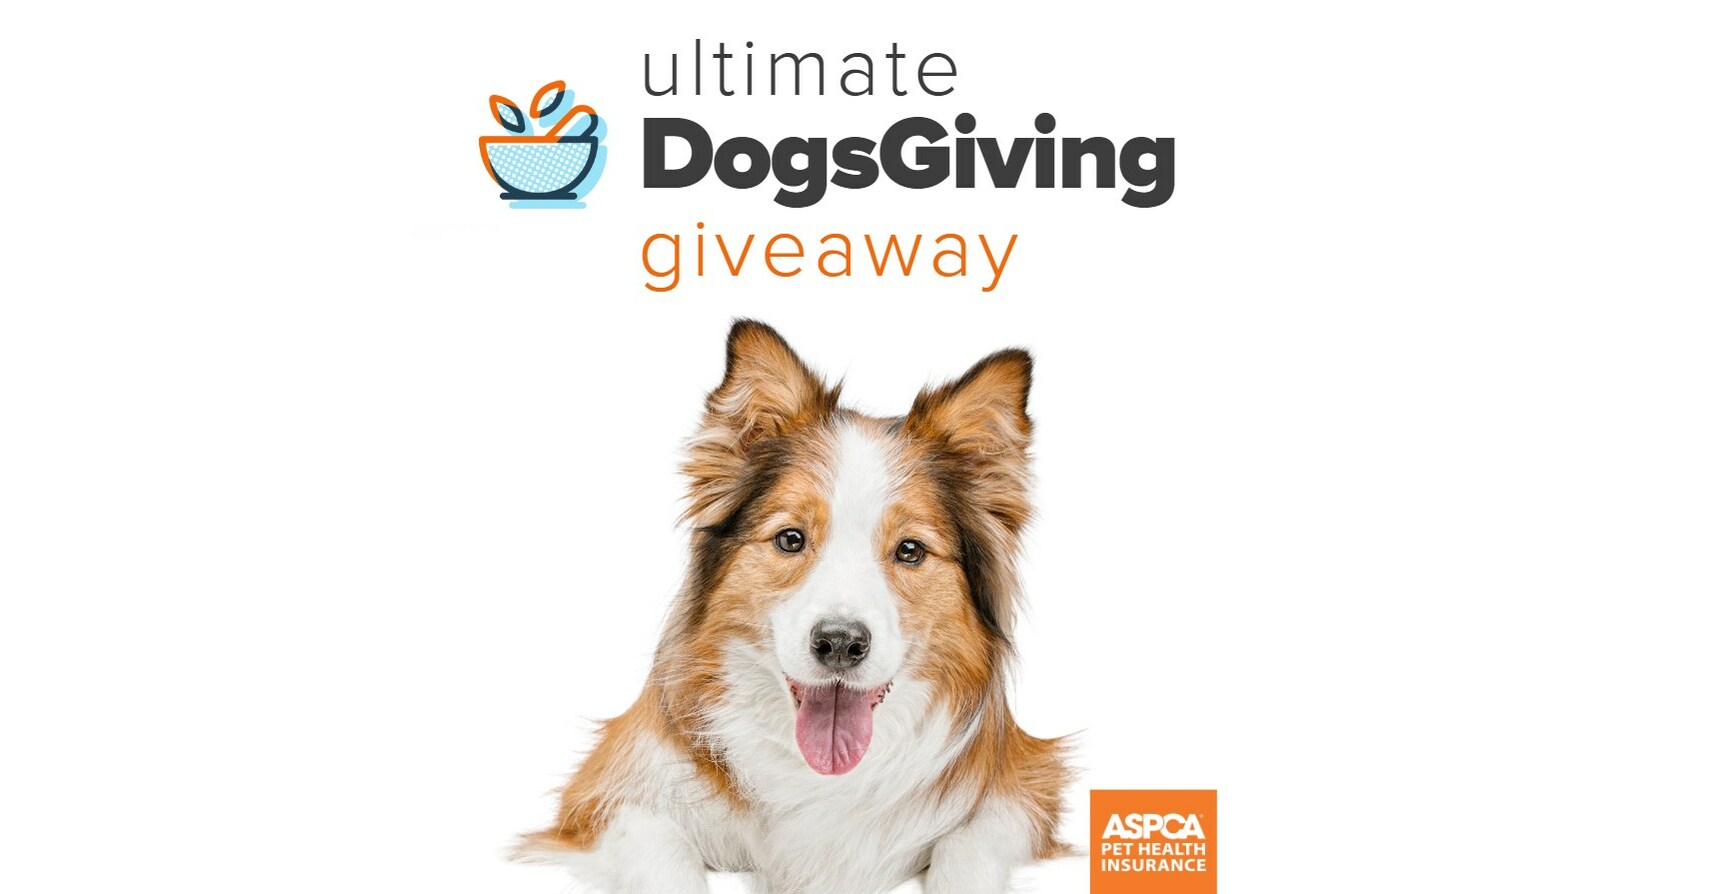 ASPCA Pet Health Insurance Makes Thanksgiving a “Dogsgiving” This Year